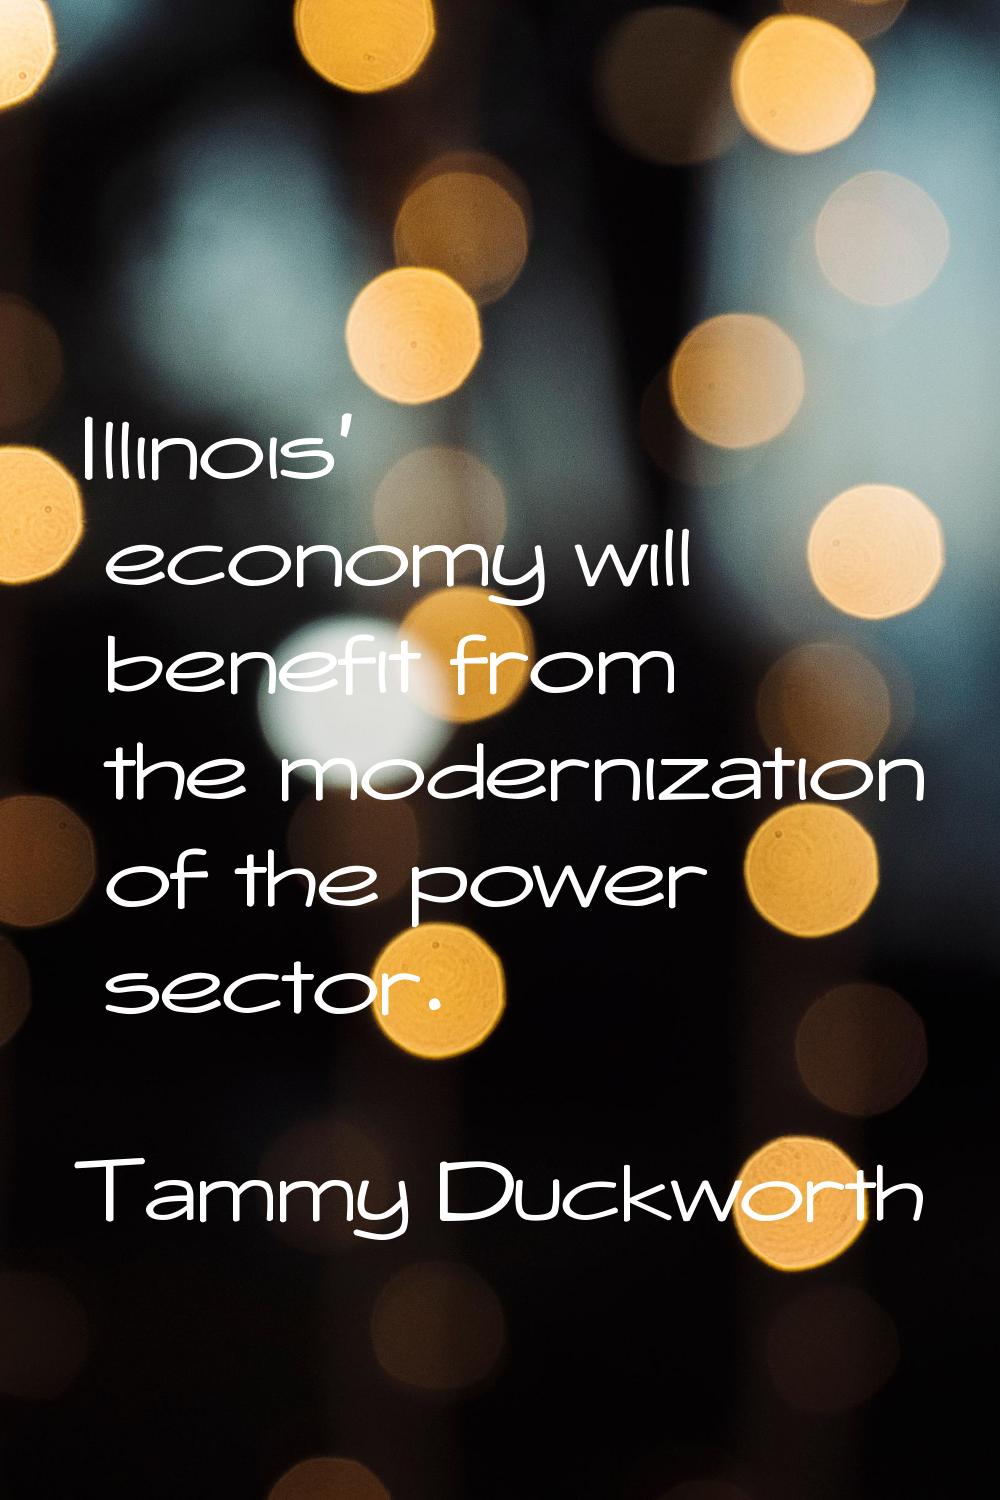 Illinois' economy will benefit from the modernization of the power sector.